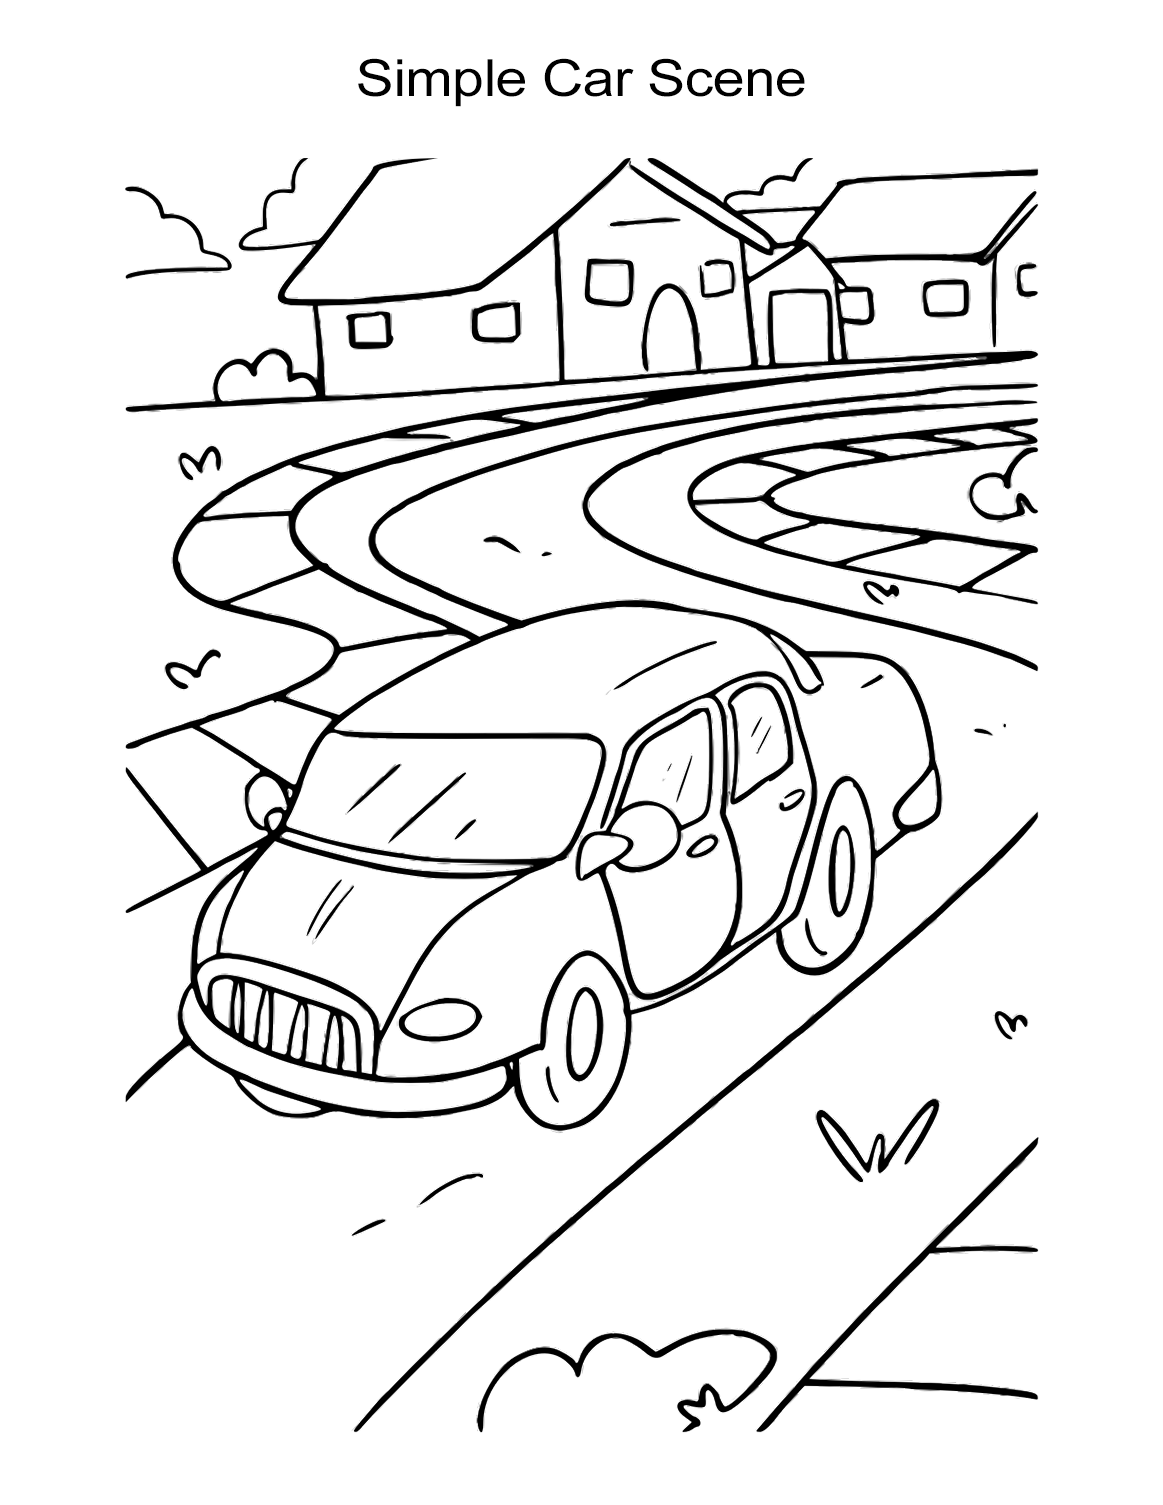 Car coloring sheets sports muscle racing cars and more